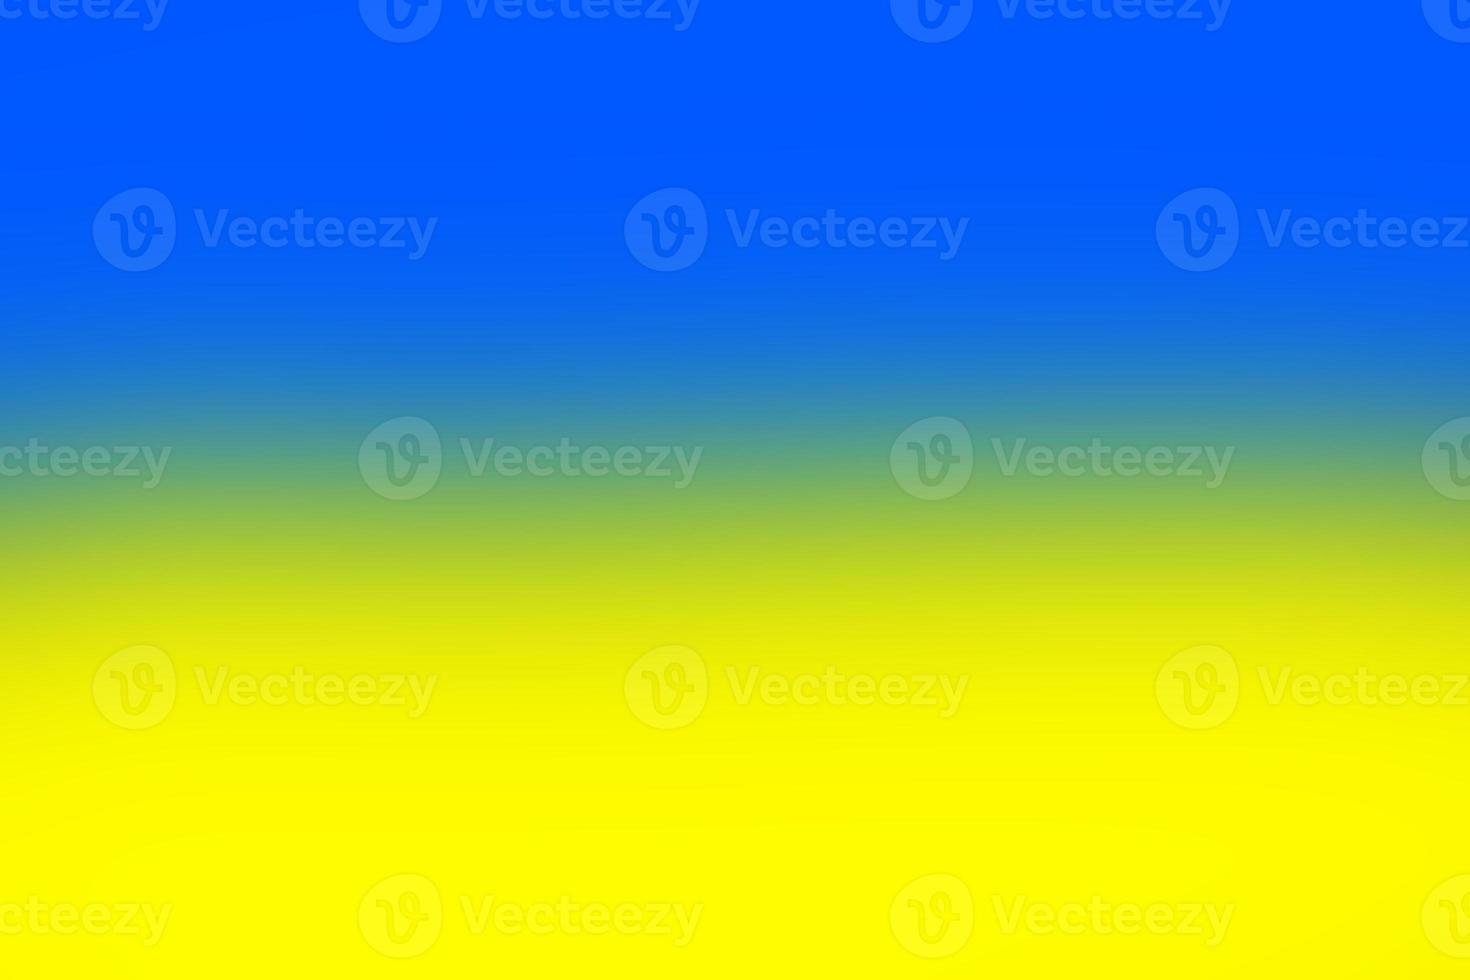 background blue yellow colors of the flag of ukraine photo